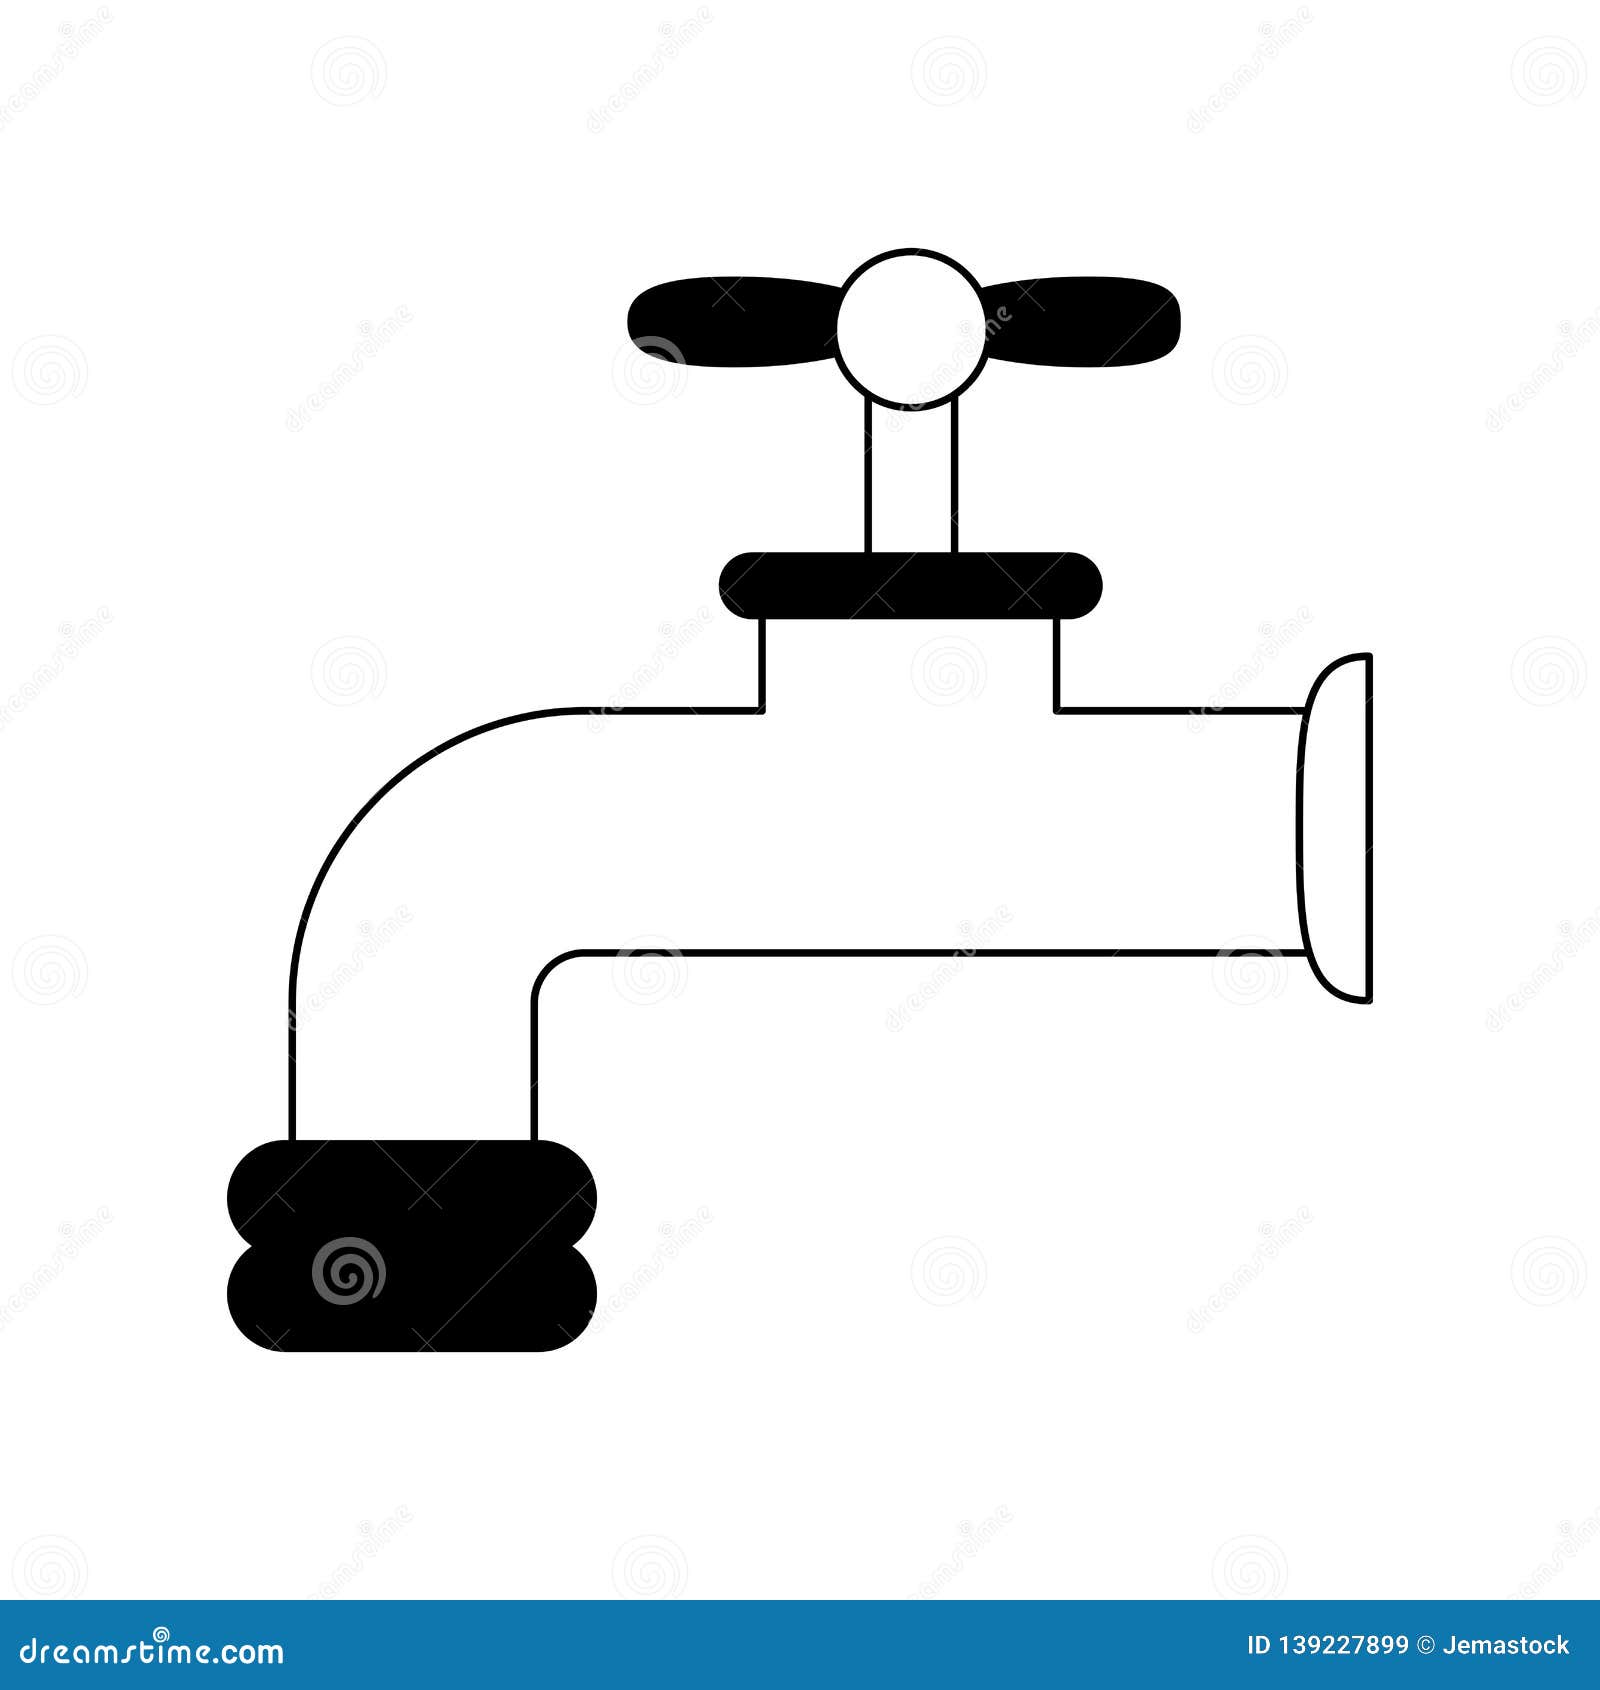 Water Tap Cartoon Isolated in Black and White Stock Vector - Illustration  of silver, hygiene: 139227899